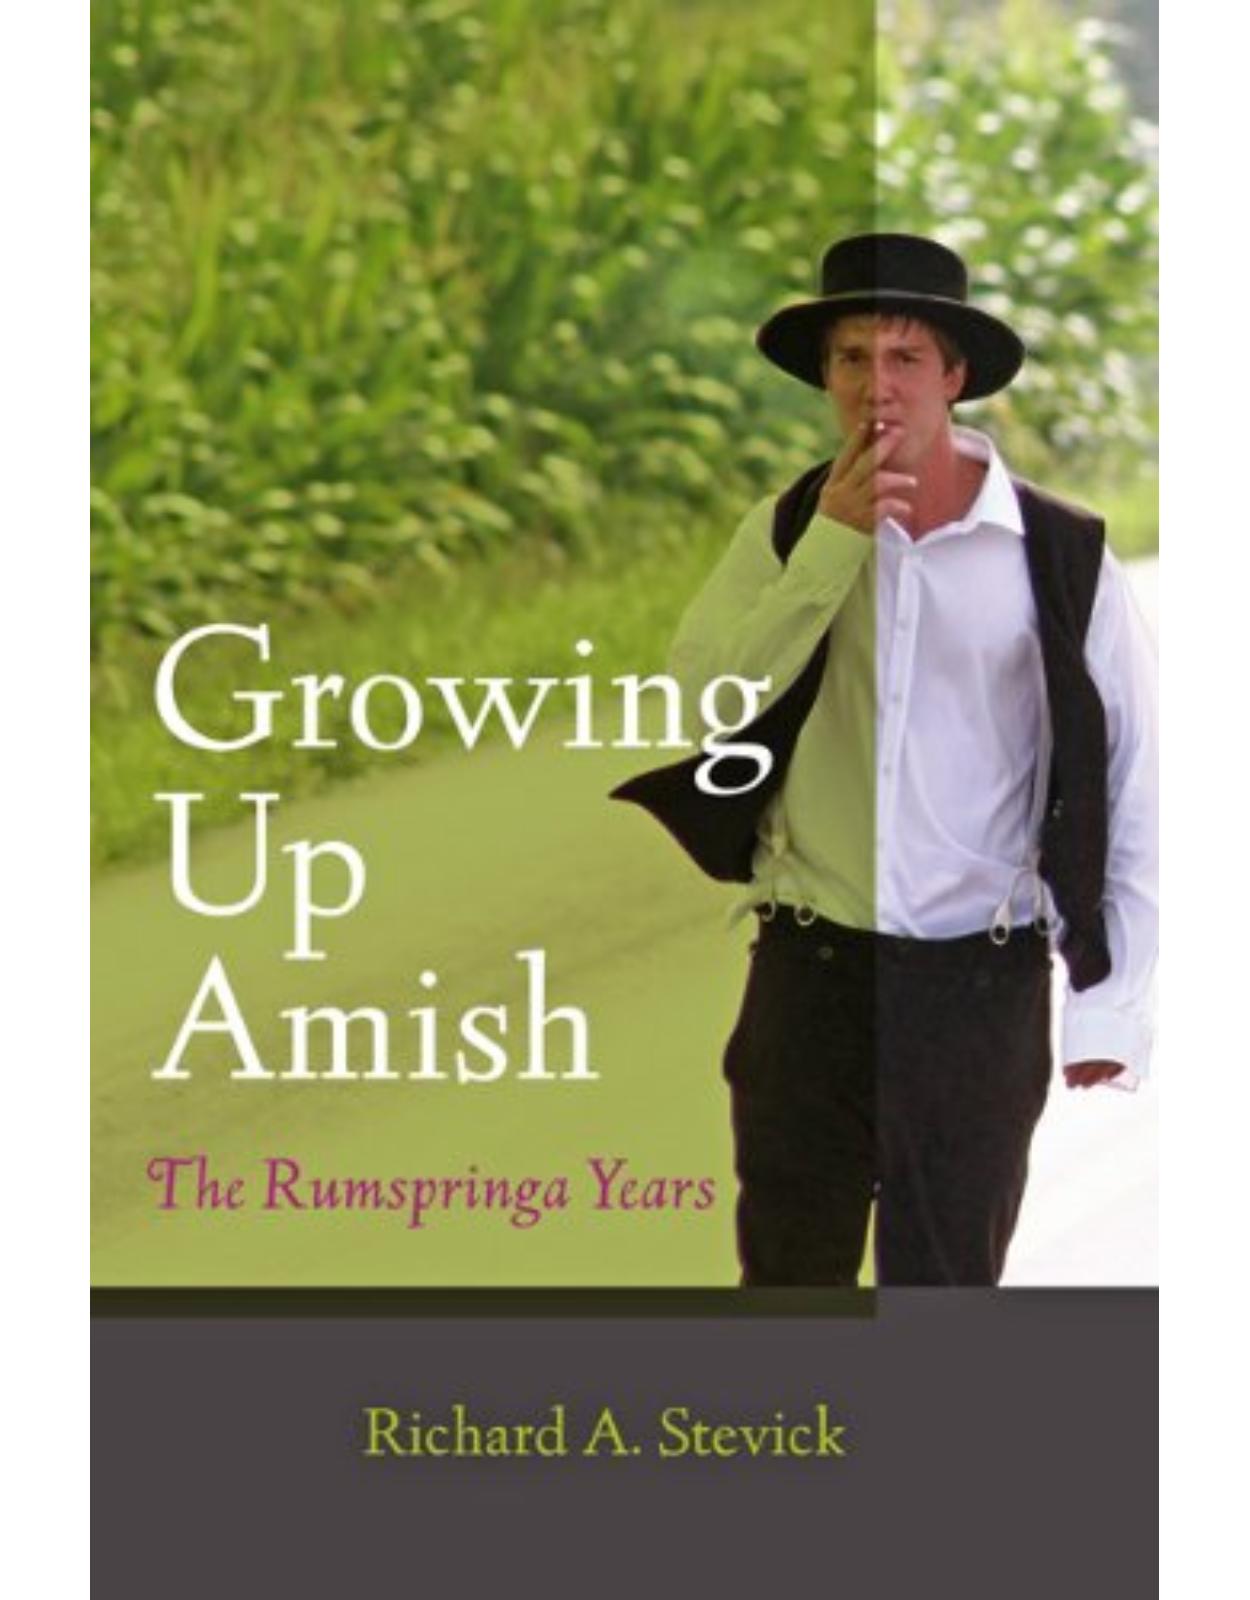 Growing Up Amish, The Rumspringa Years (Second Edition)